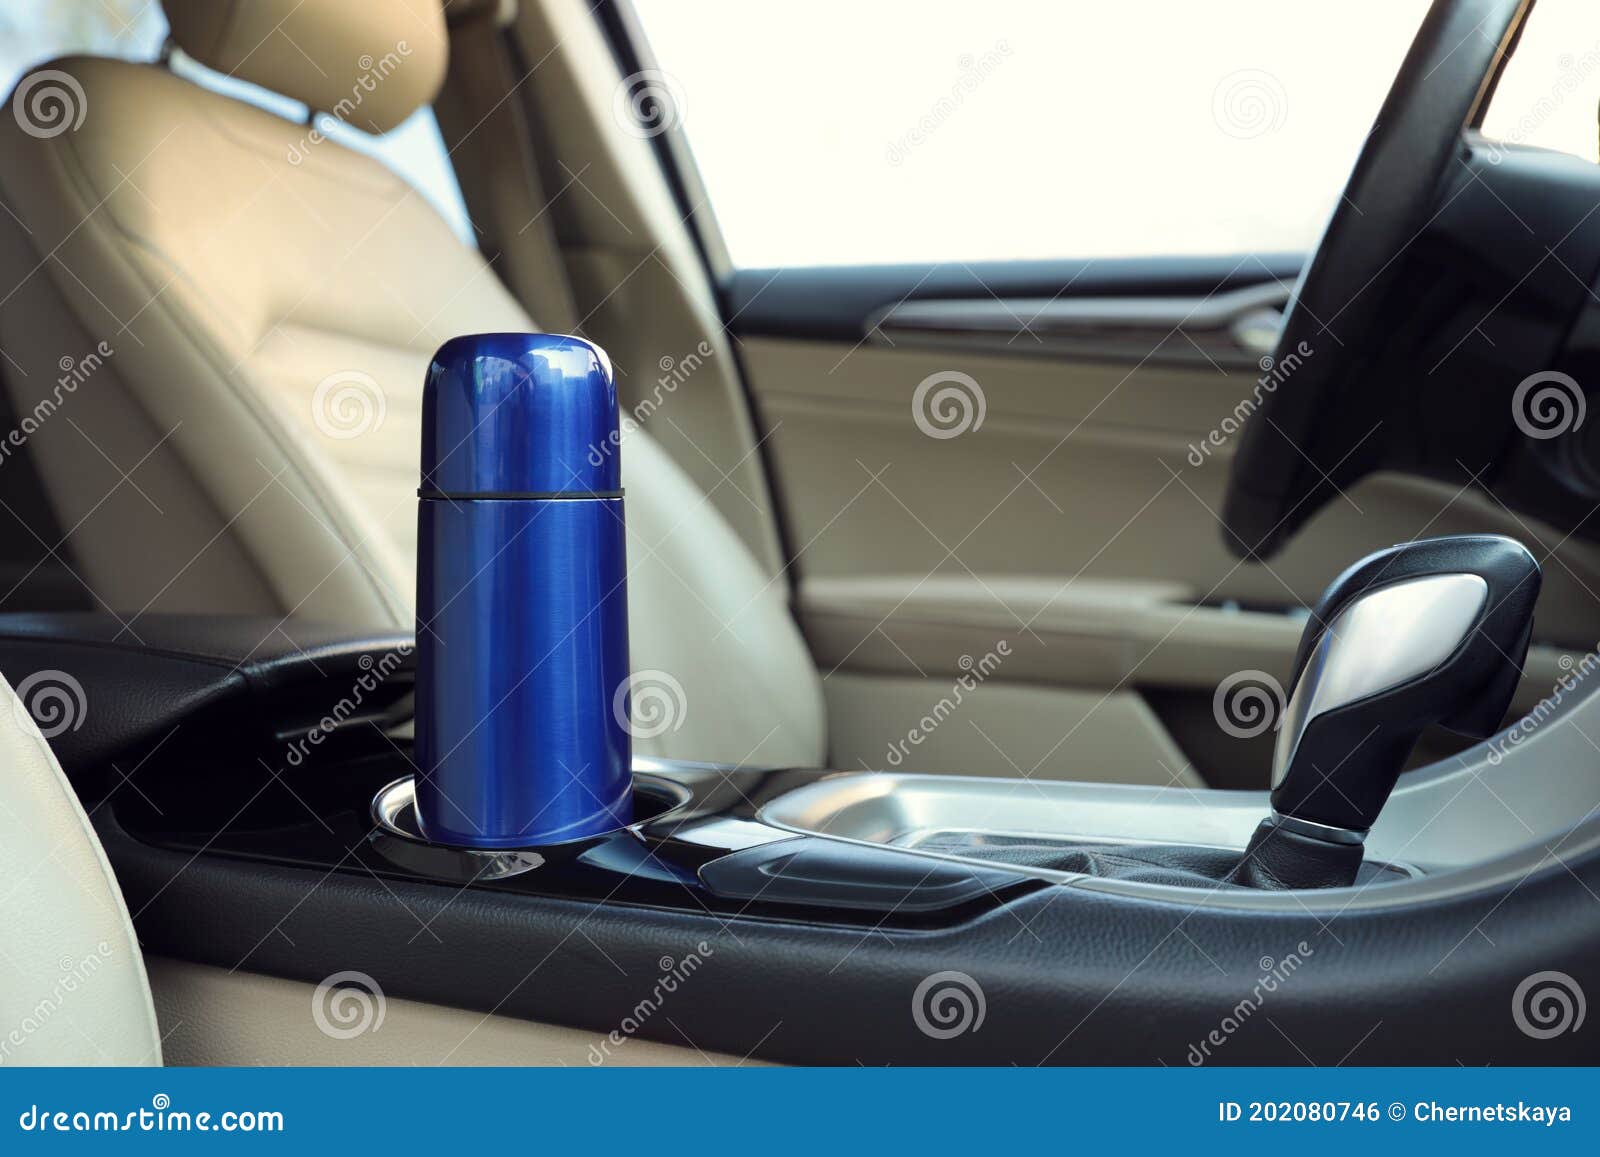 blue thermos in holder inside of car